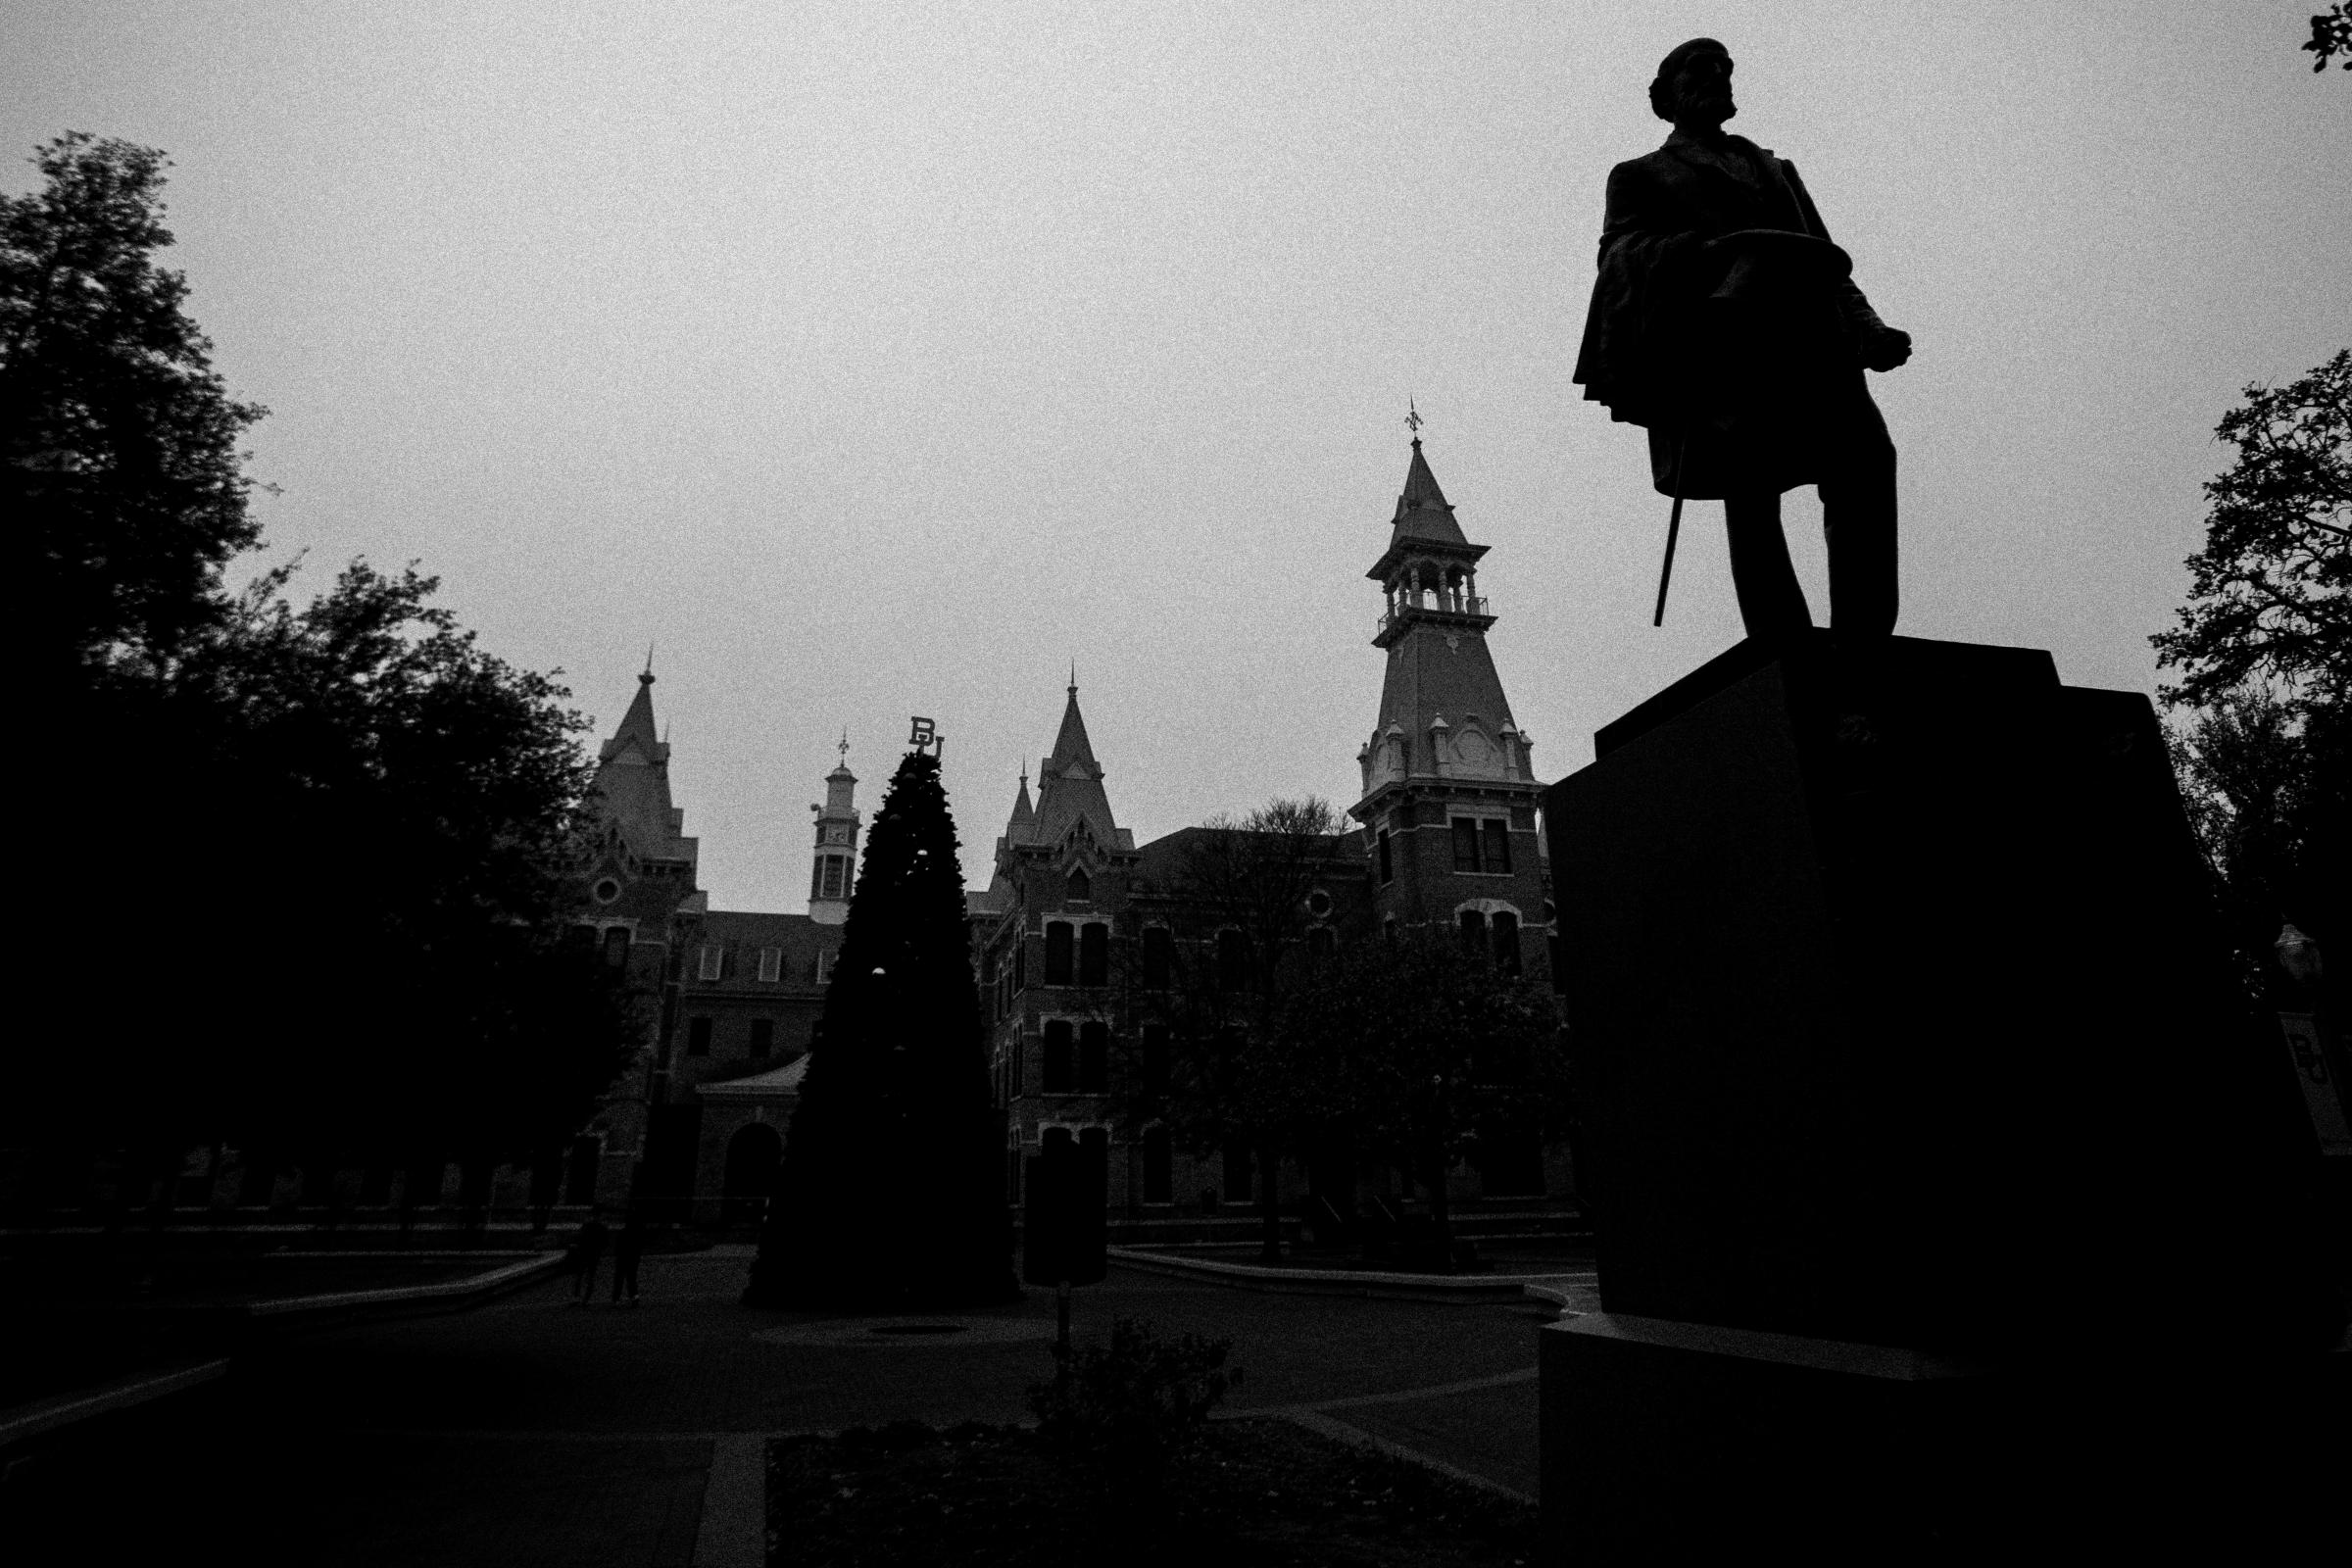 01/08/2022 - Image of a statue at the Waco, Texas Baylor, University.